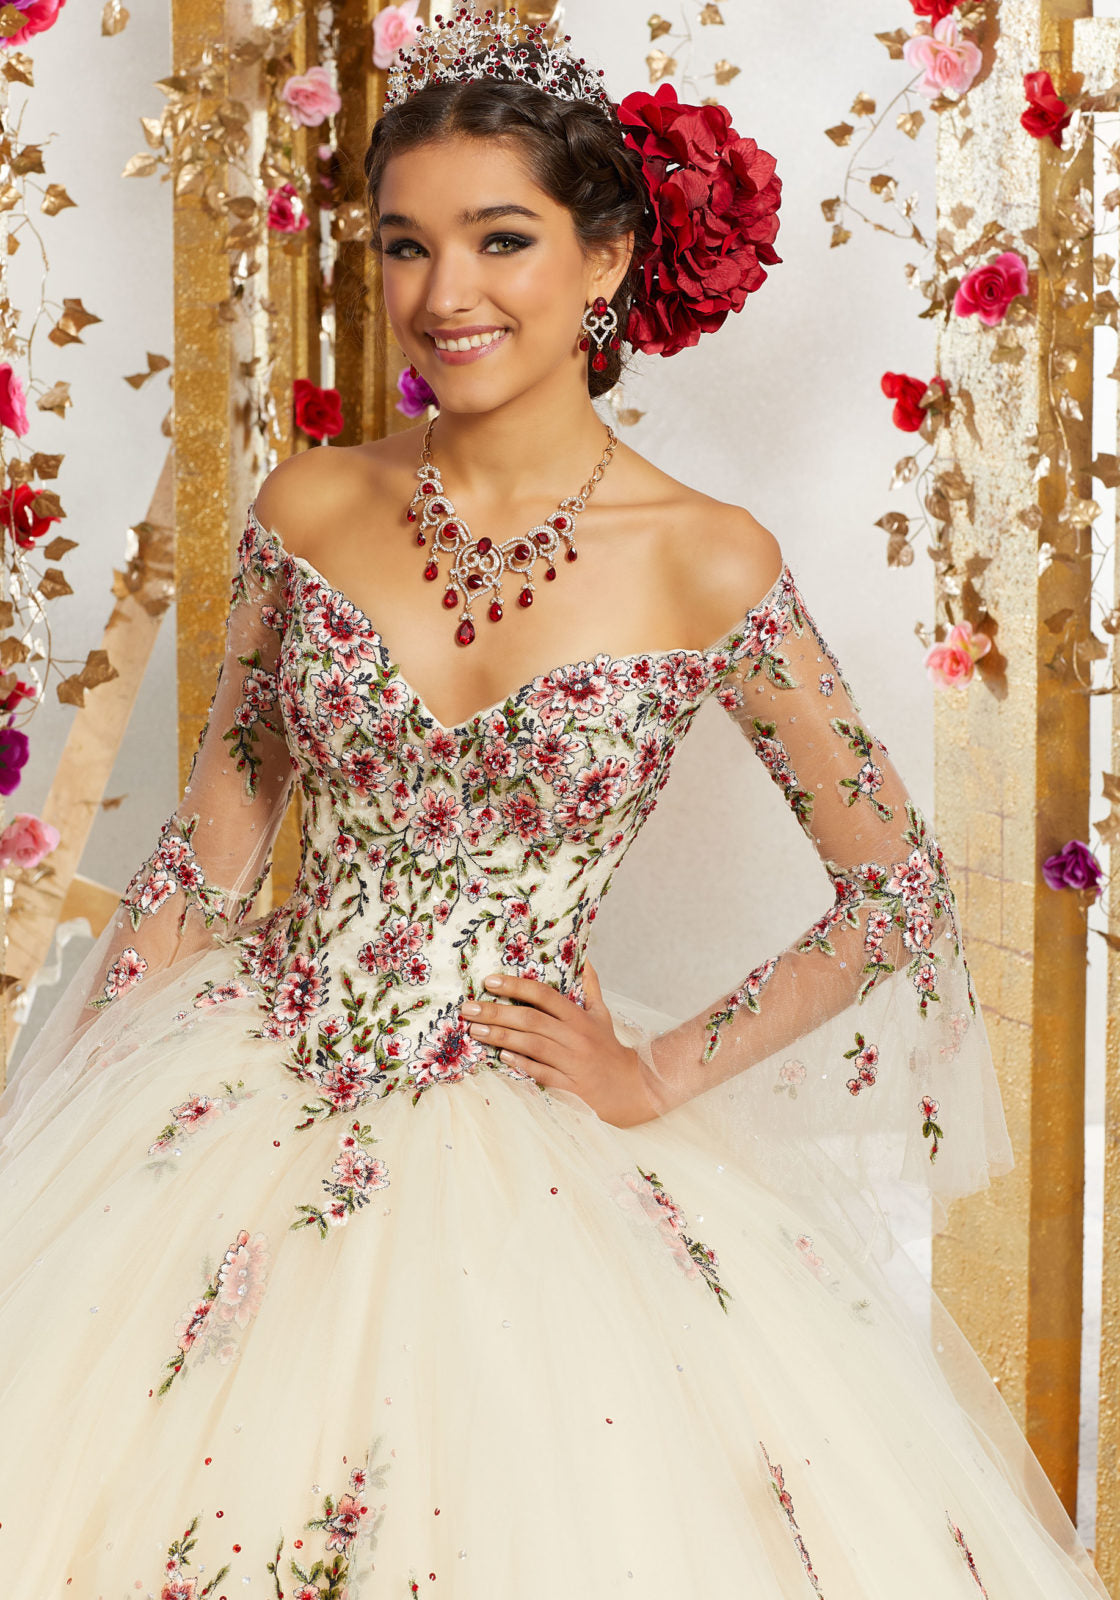 Crystal Beaded Embroidery on a Tulle Ballgown #34003